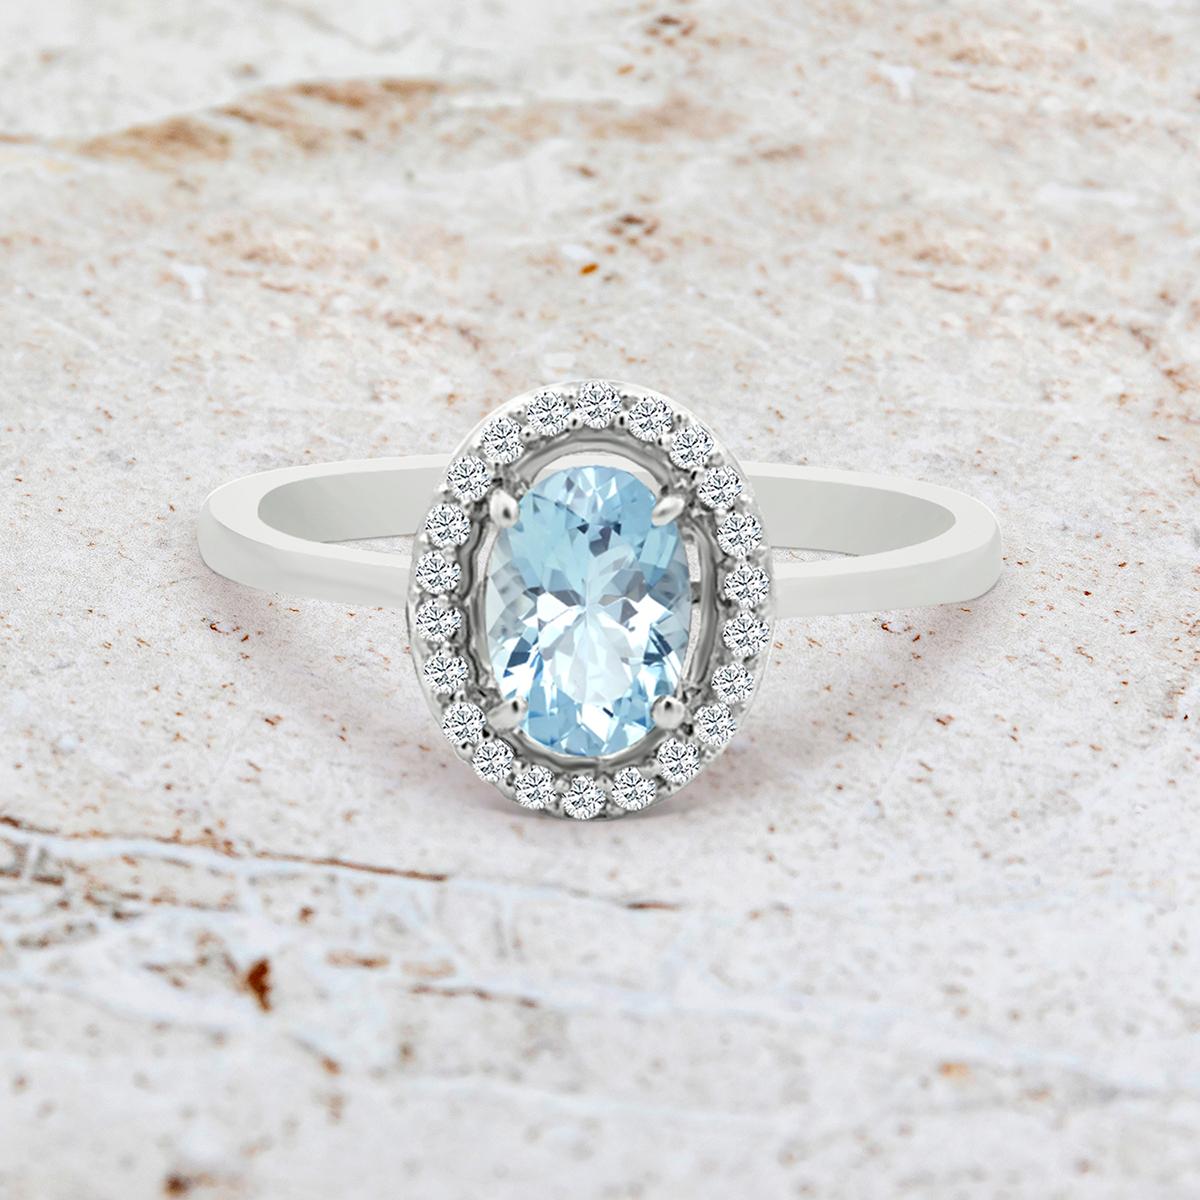 Women's 14K White Gold 0.70cts Aquamarine And Diamond Ring. Style# TS1310AQR 22028/10 For Sale